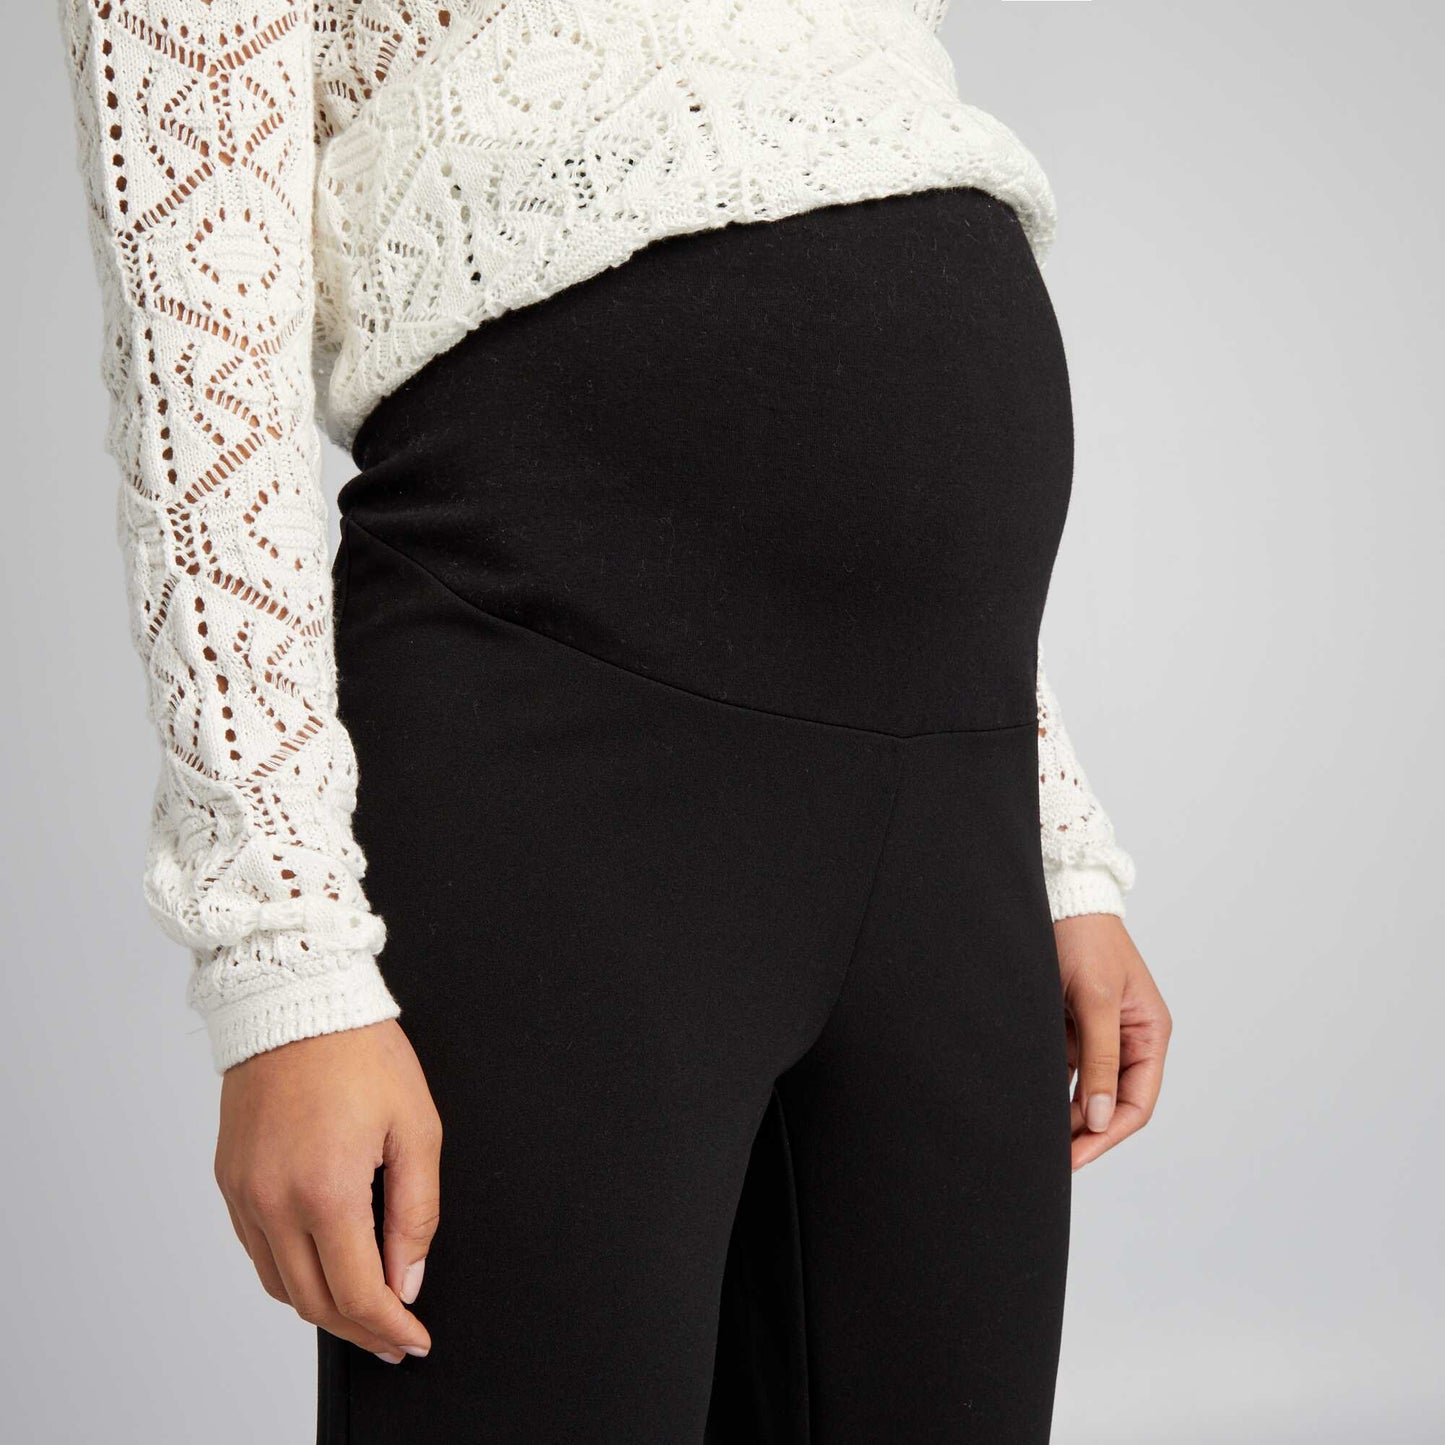 Flared maternity trousers black